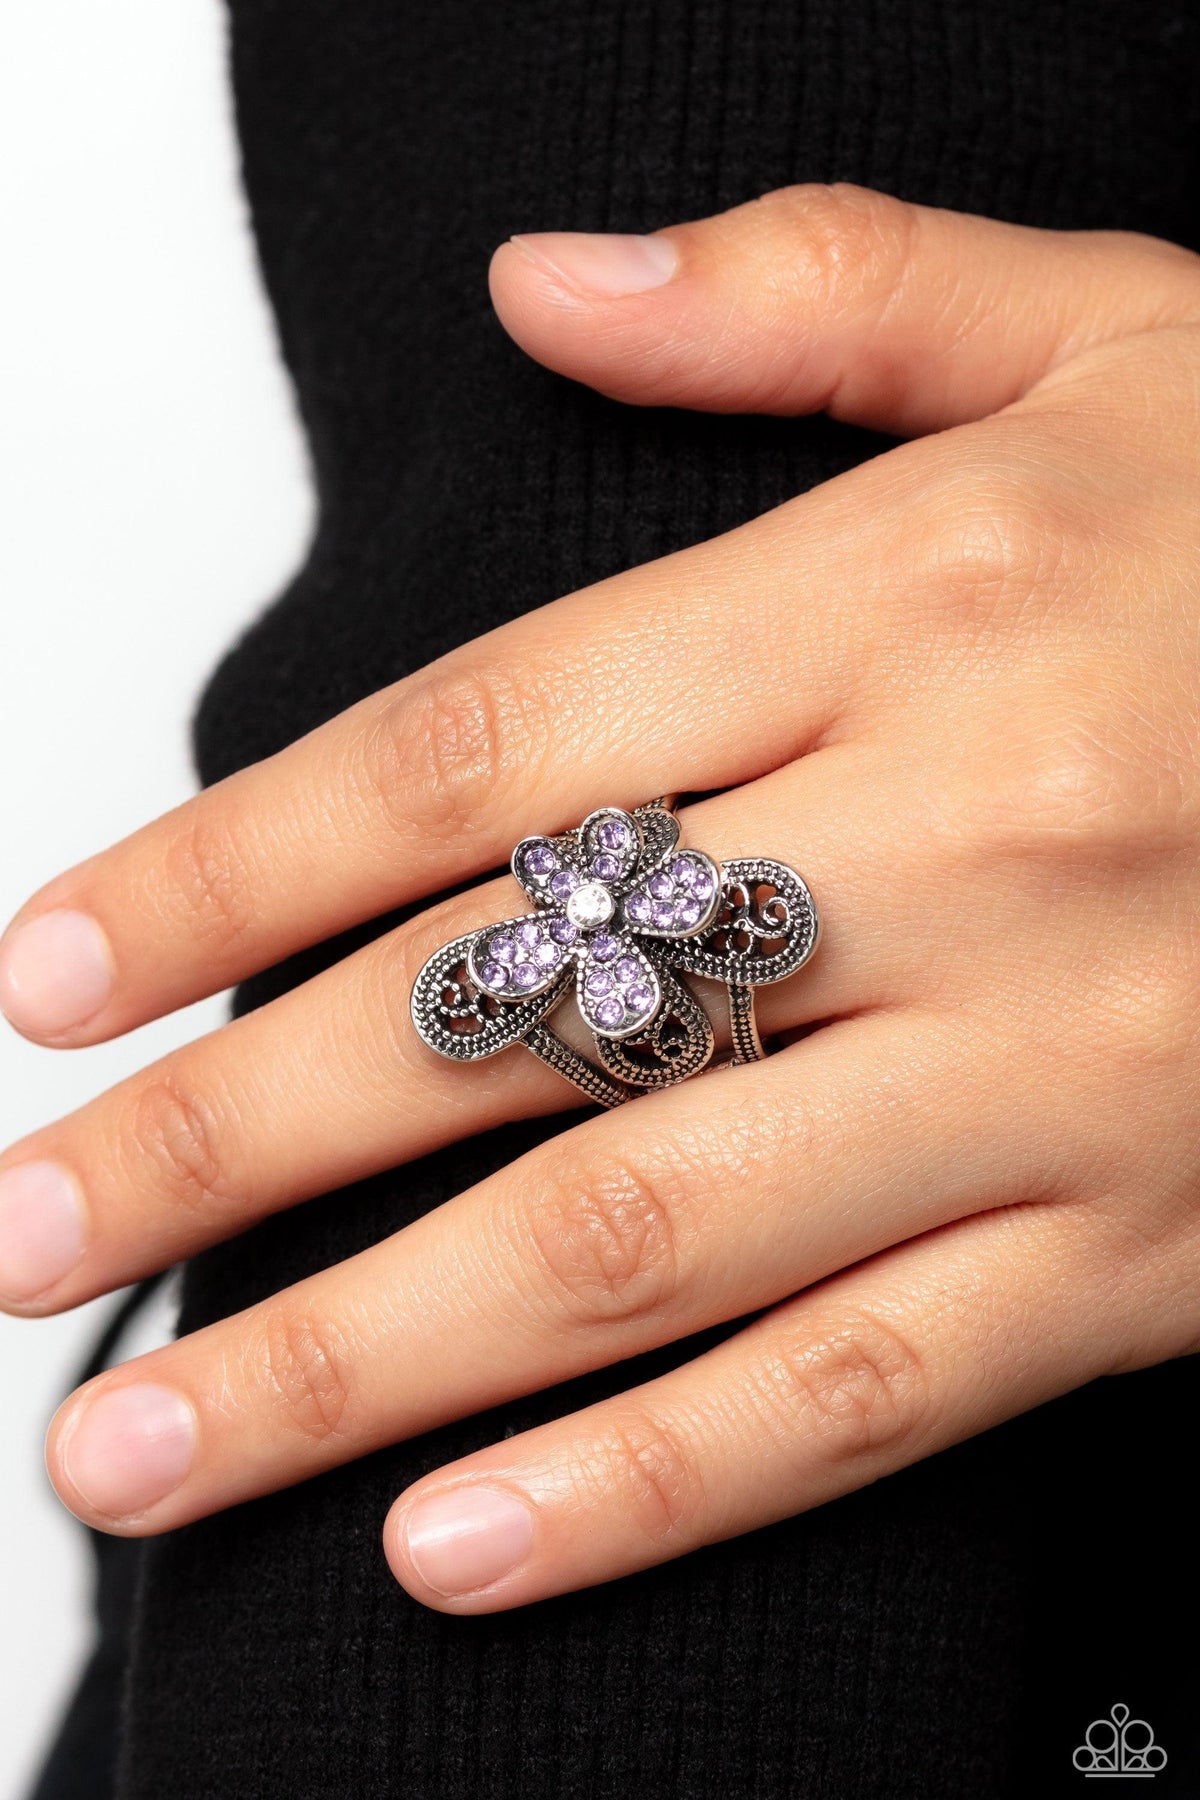 Garden Escapade Purple Flower Ring - Paparazzi Accessories-on model - CarasShop.com - $5 Jewelry by Cara Jewels